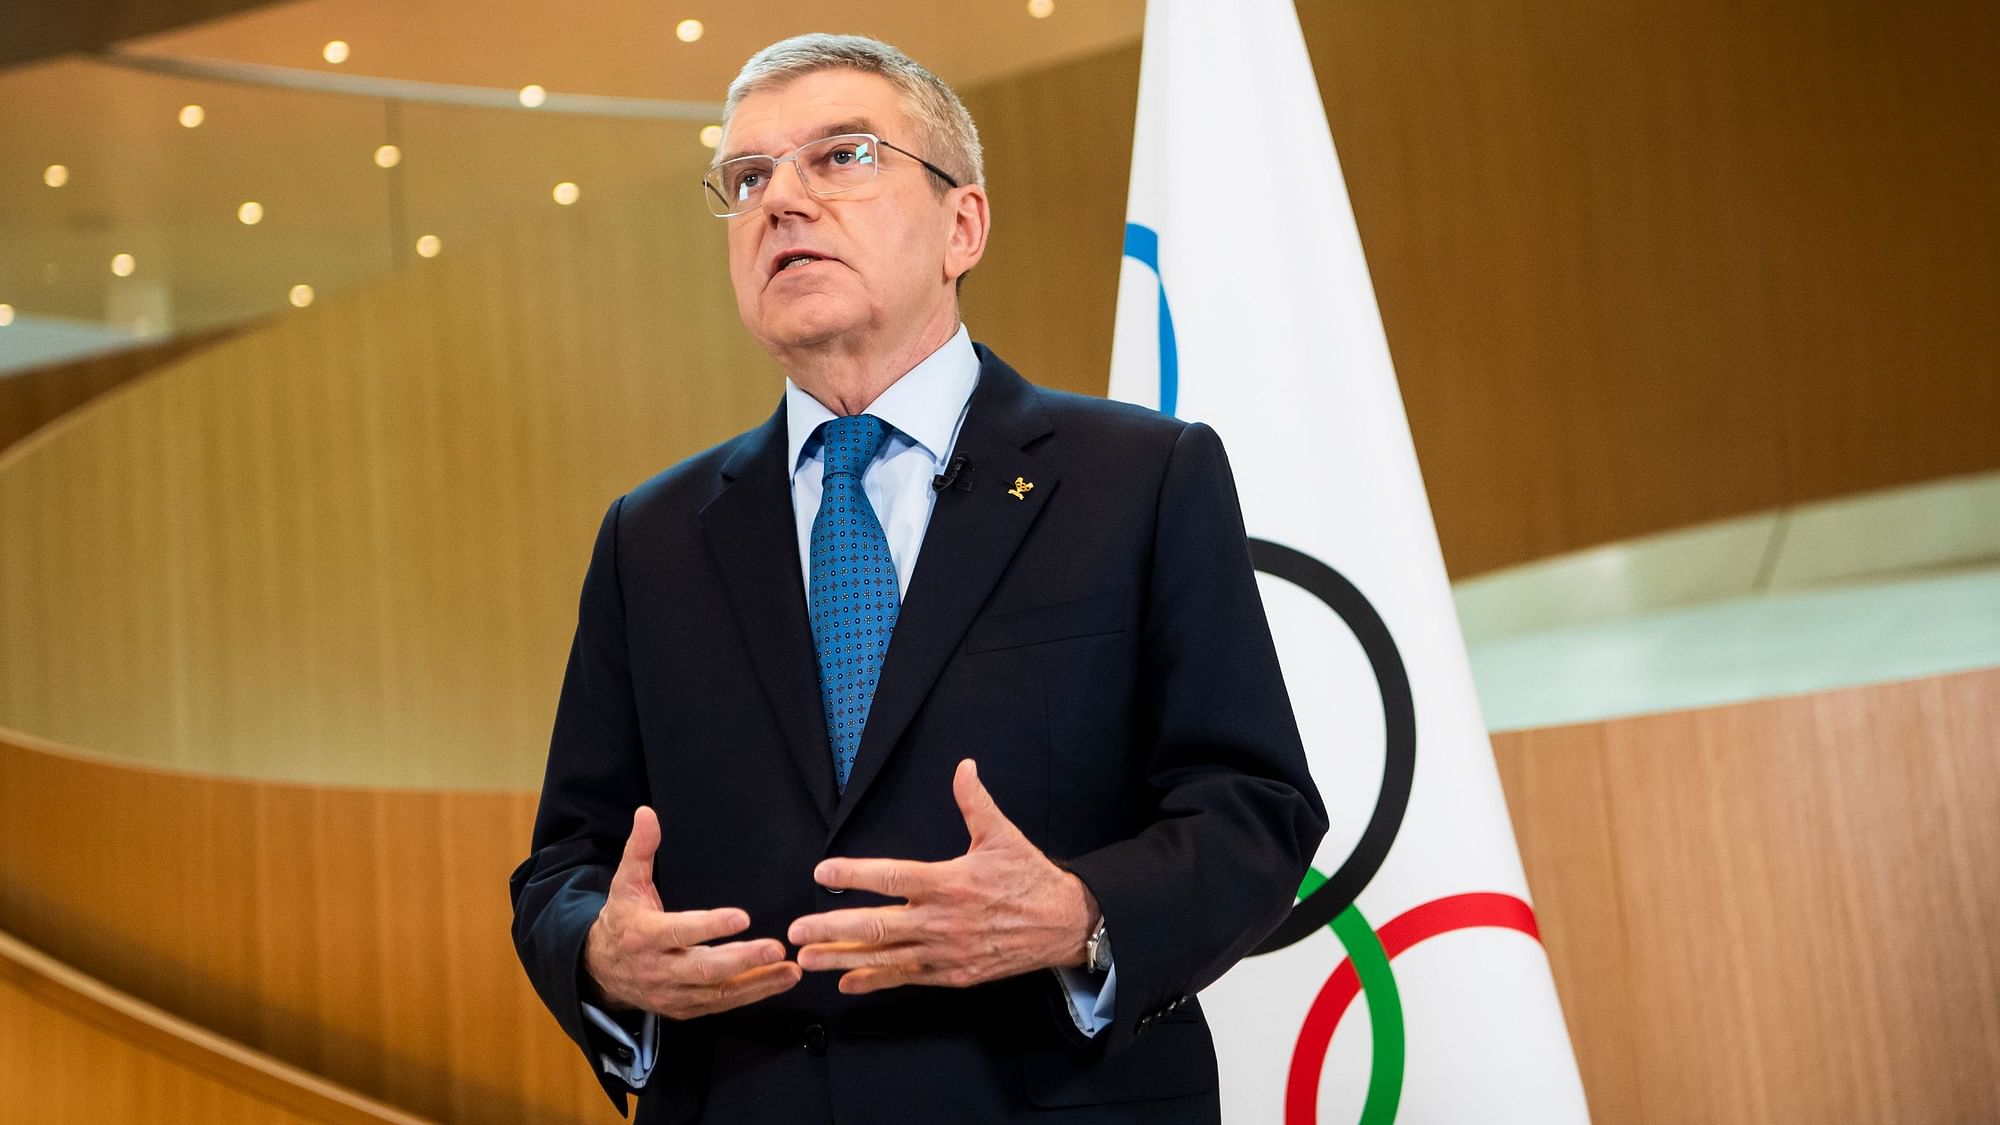 After the postponement, IOC President Thomas Bach gave no specific new date for the Tokyo Olympics, saying only it would be “beyond 2020 but not later than summer 2021.”